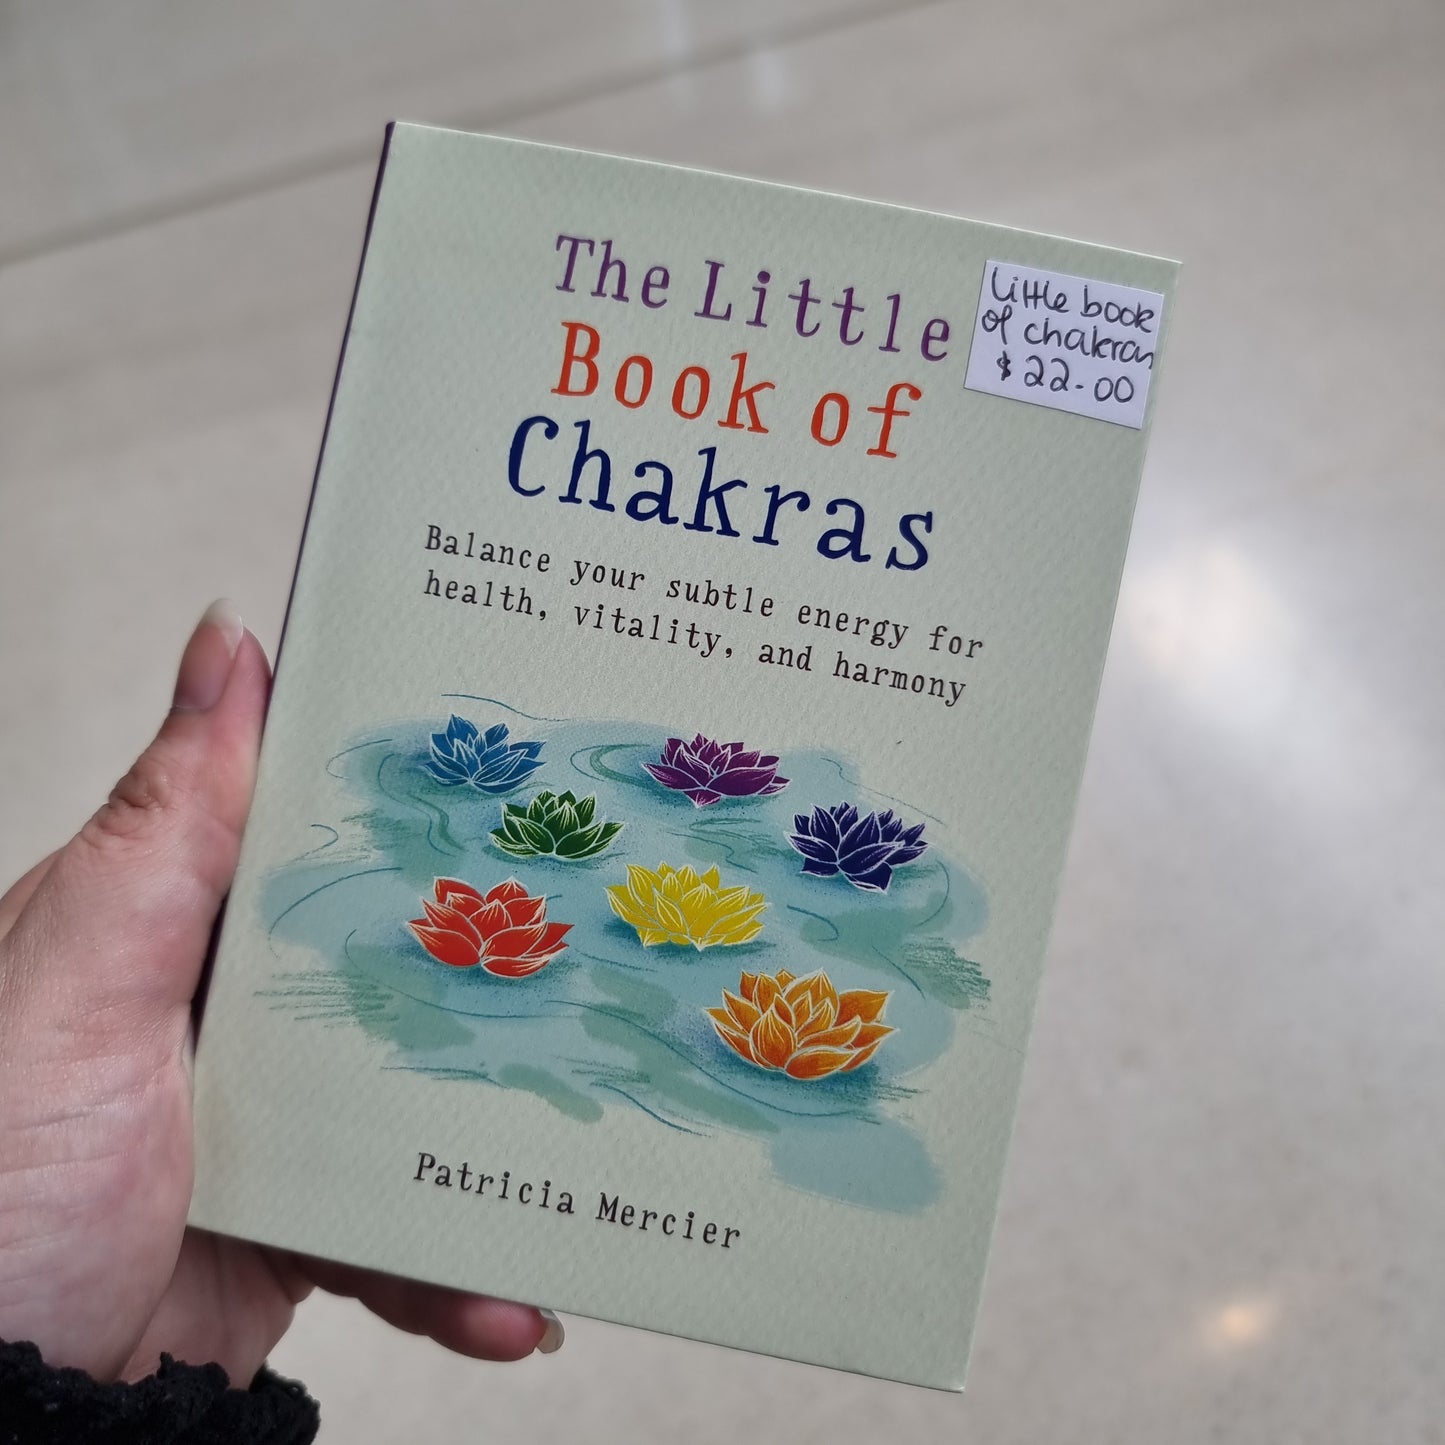 The little book of Chakras - Rivendell Shop